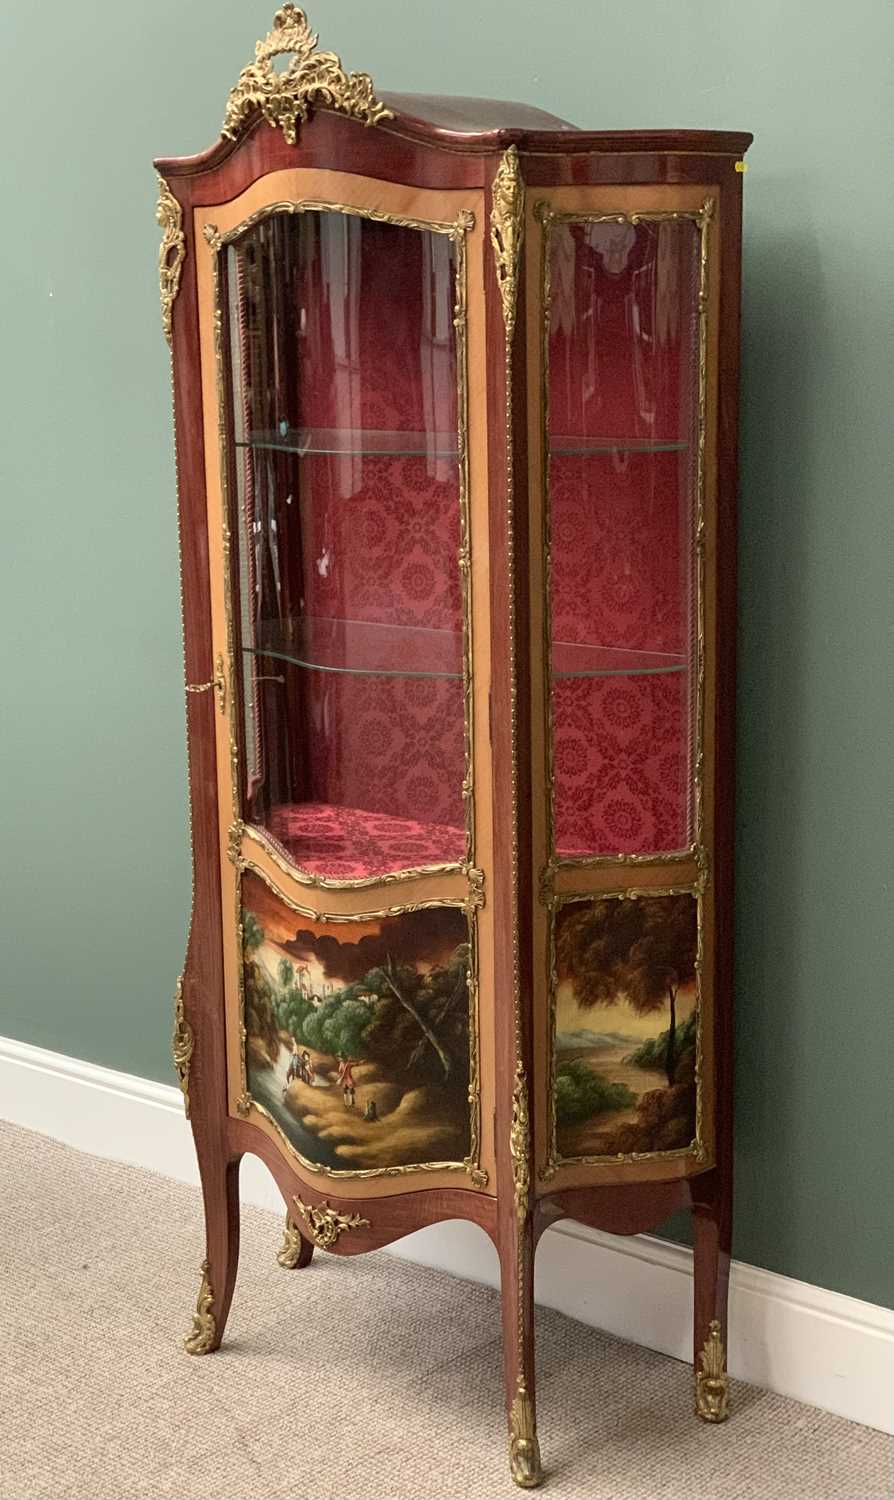 ANTIQUE FRENCH LOUIS XV STYLE VITRINE by H & L Epstein Ltd, London, having vernis martin type - Image 3 of 7